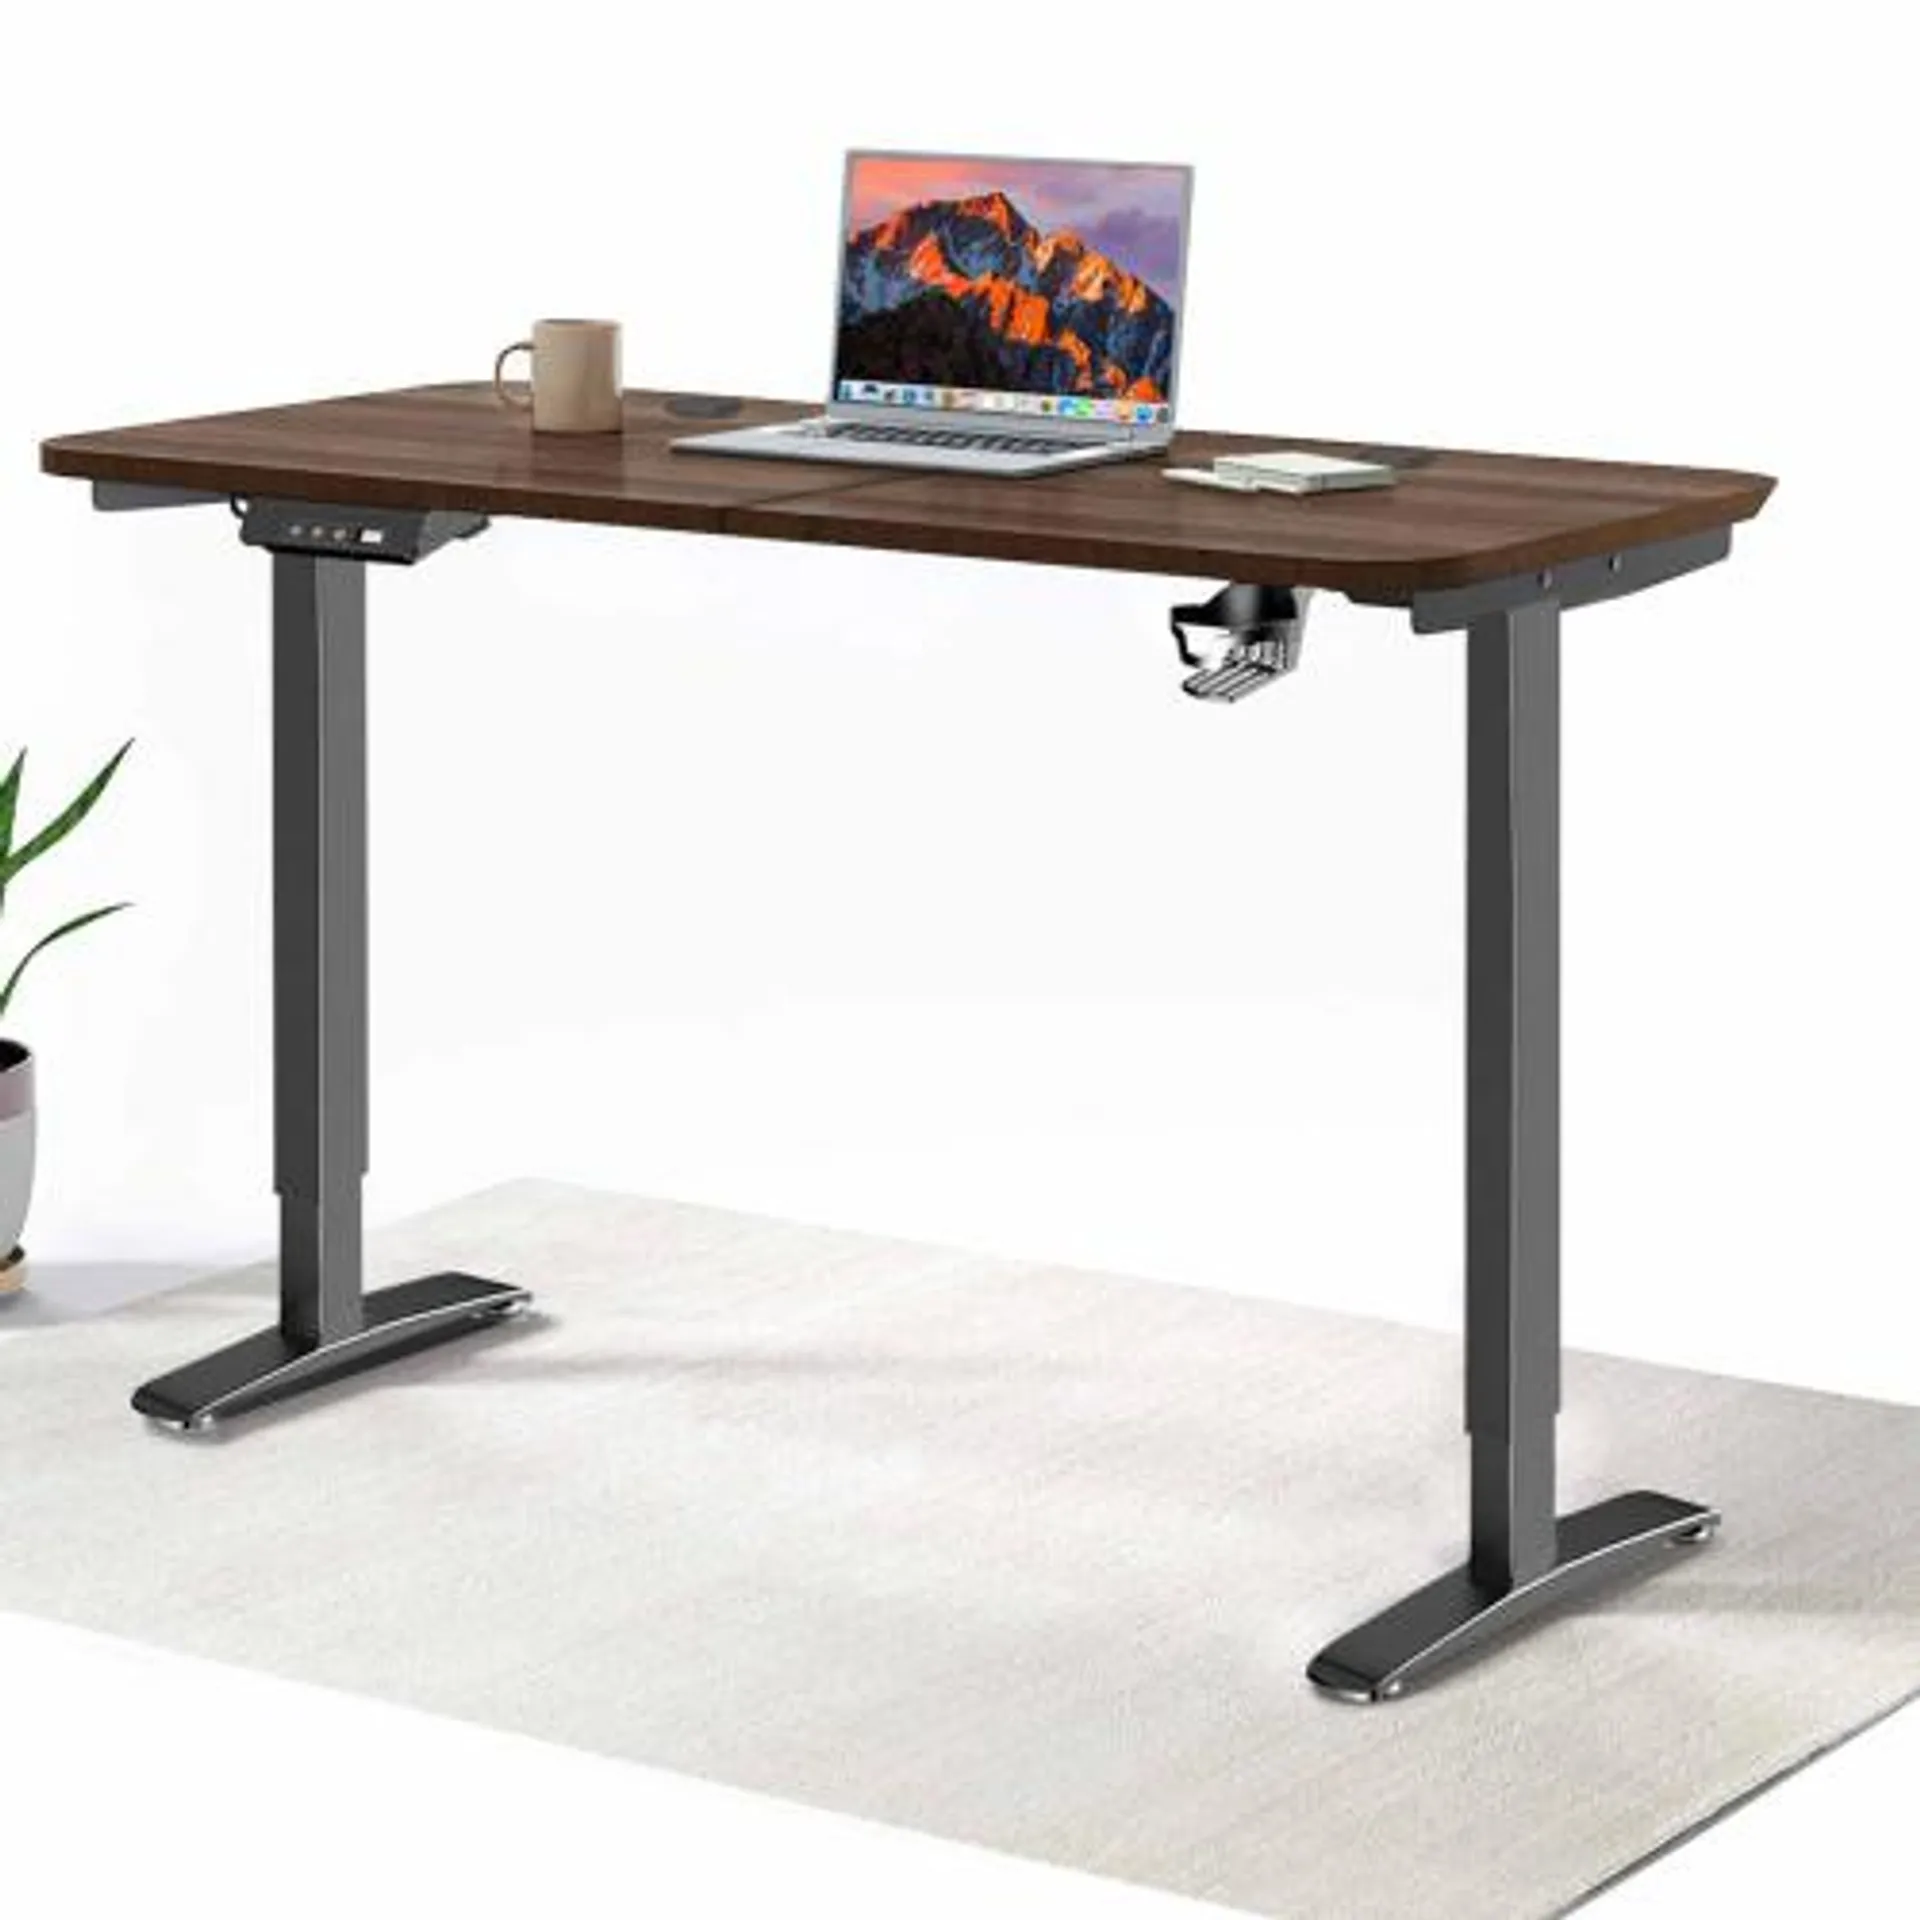 MotionGrey Standing Desk Height Adjustable Electric Motor Sit-to-Stand Desk Computer for Home and Office - Black Frame (55x24 Tabletop Included) - Only at Best Buy